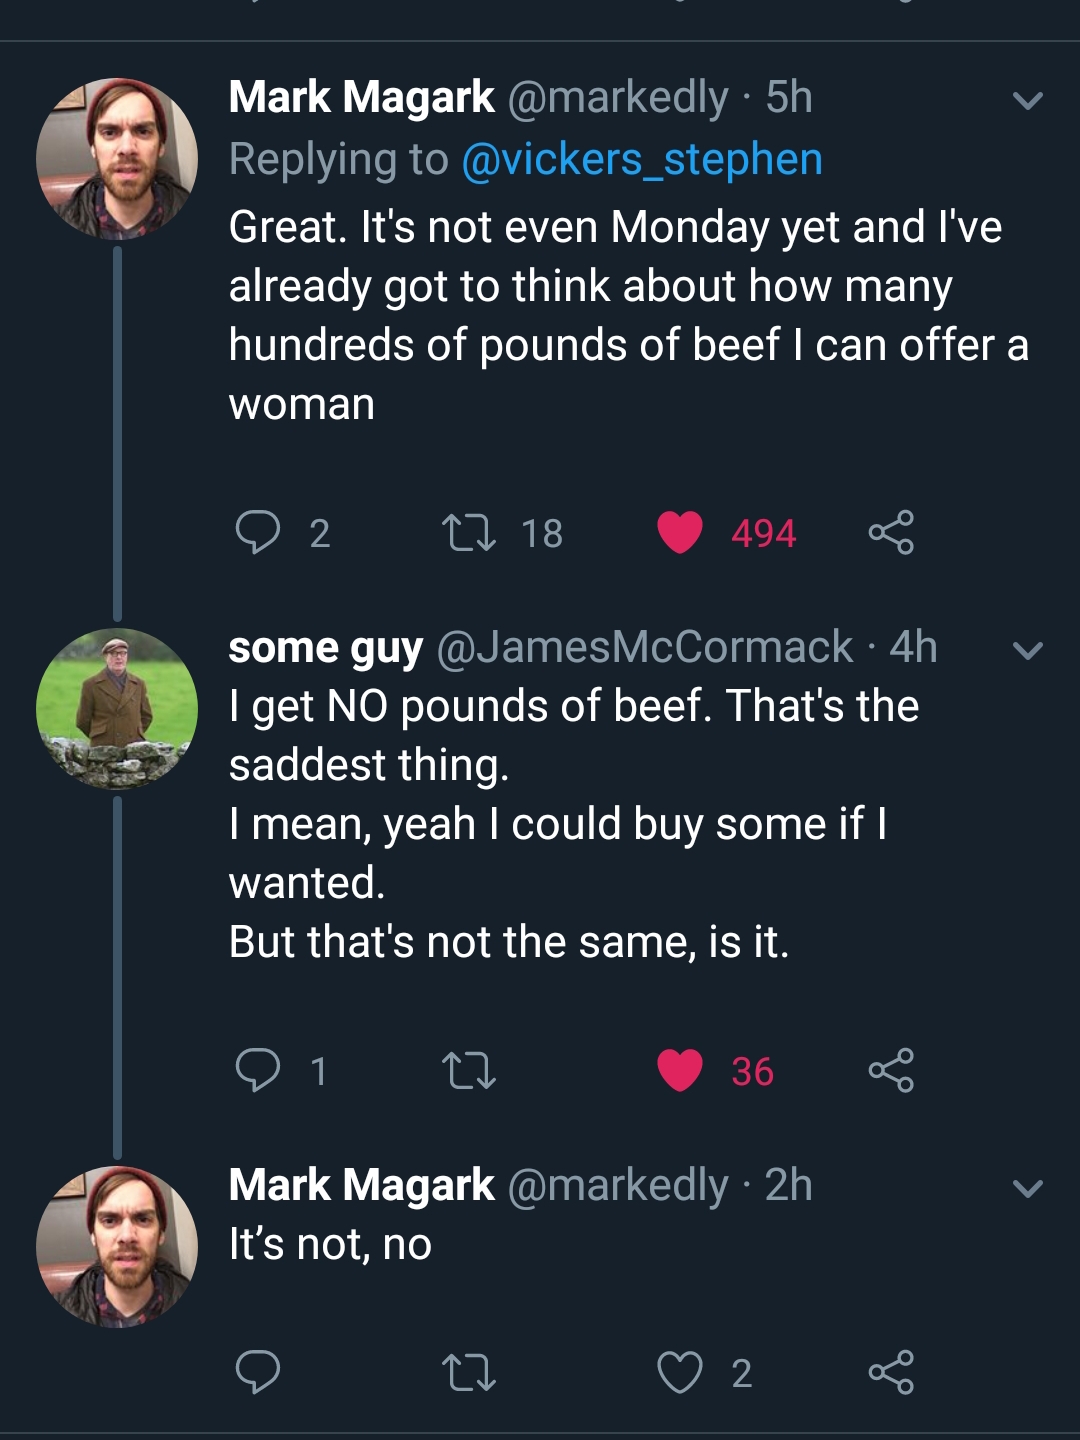 rant - passion quotes - Mark Magark 5h Great. It's not even Monday yet and I've already got to think about how many hundreds of pounds of beef I can offer a woman 02 22 18 494 g some guy McCormack 4h I get No pounds of beef. That's the saddest thing. I me